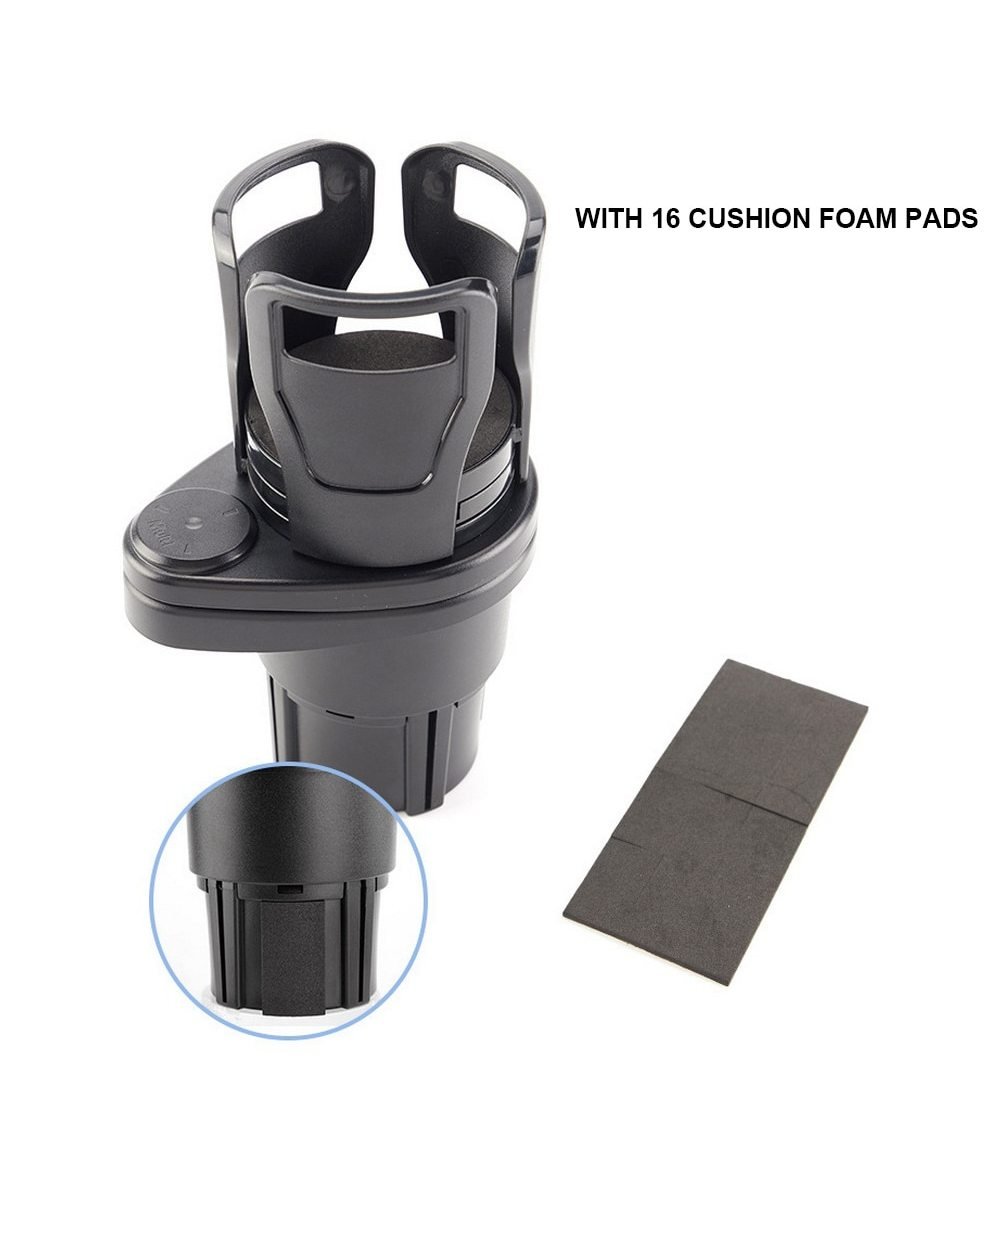 (Last Day Promotion🔥🔥)- All Purpose Car Cup Holder